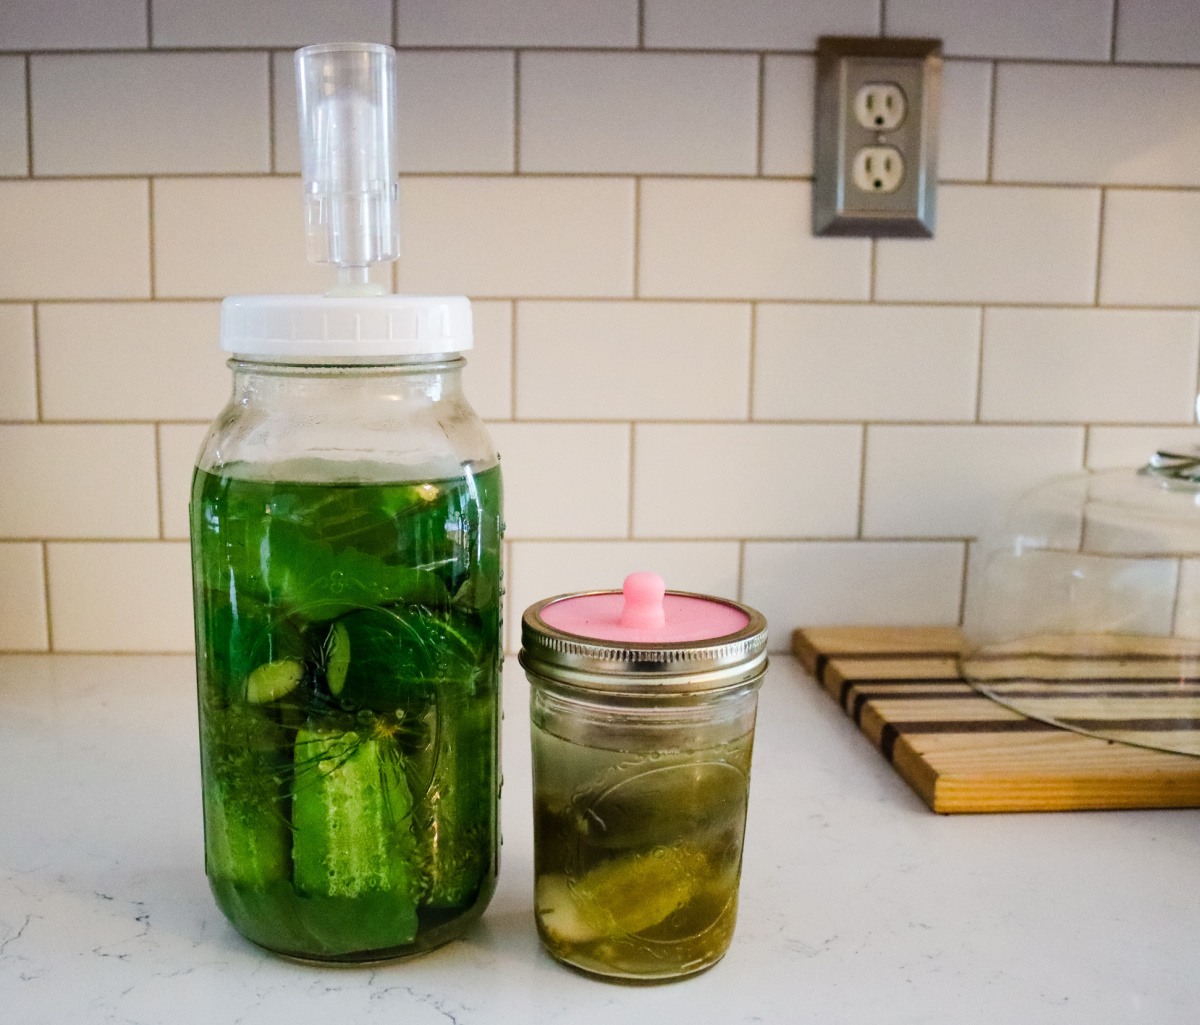 Mason jar filled with pickles sitting on a towel on a table. Text overlay says, "Old Fashioned Salt Water Brine Fermented Pickles."